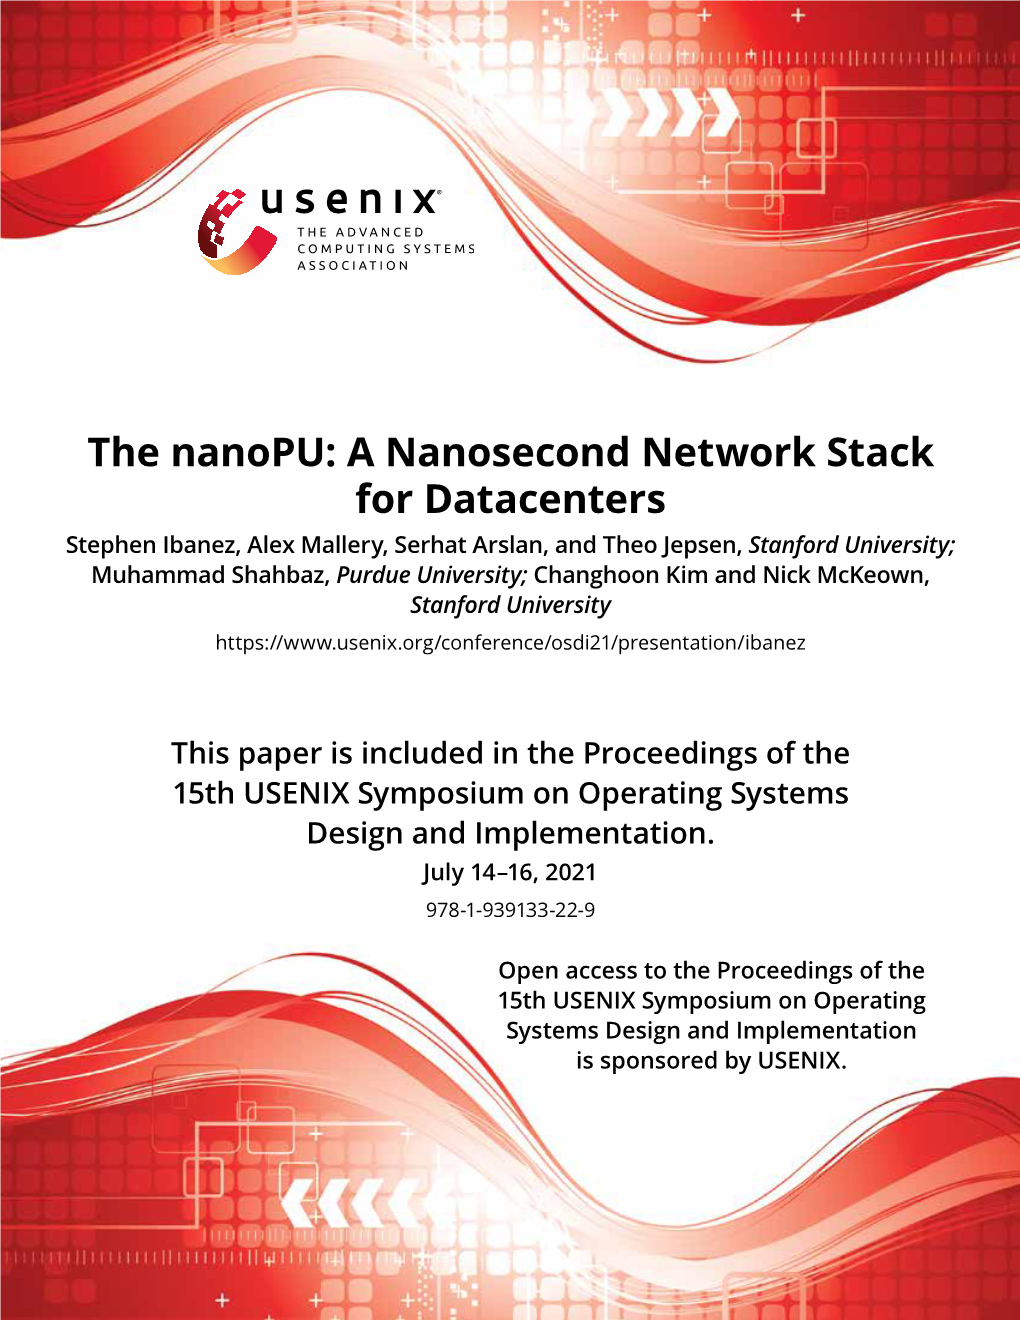 The Nanopu: a Nanosecond Network Stack for Datacenters